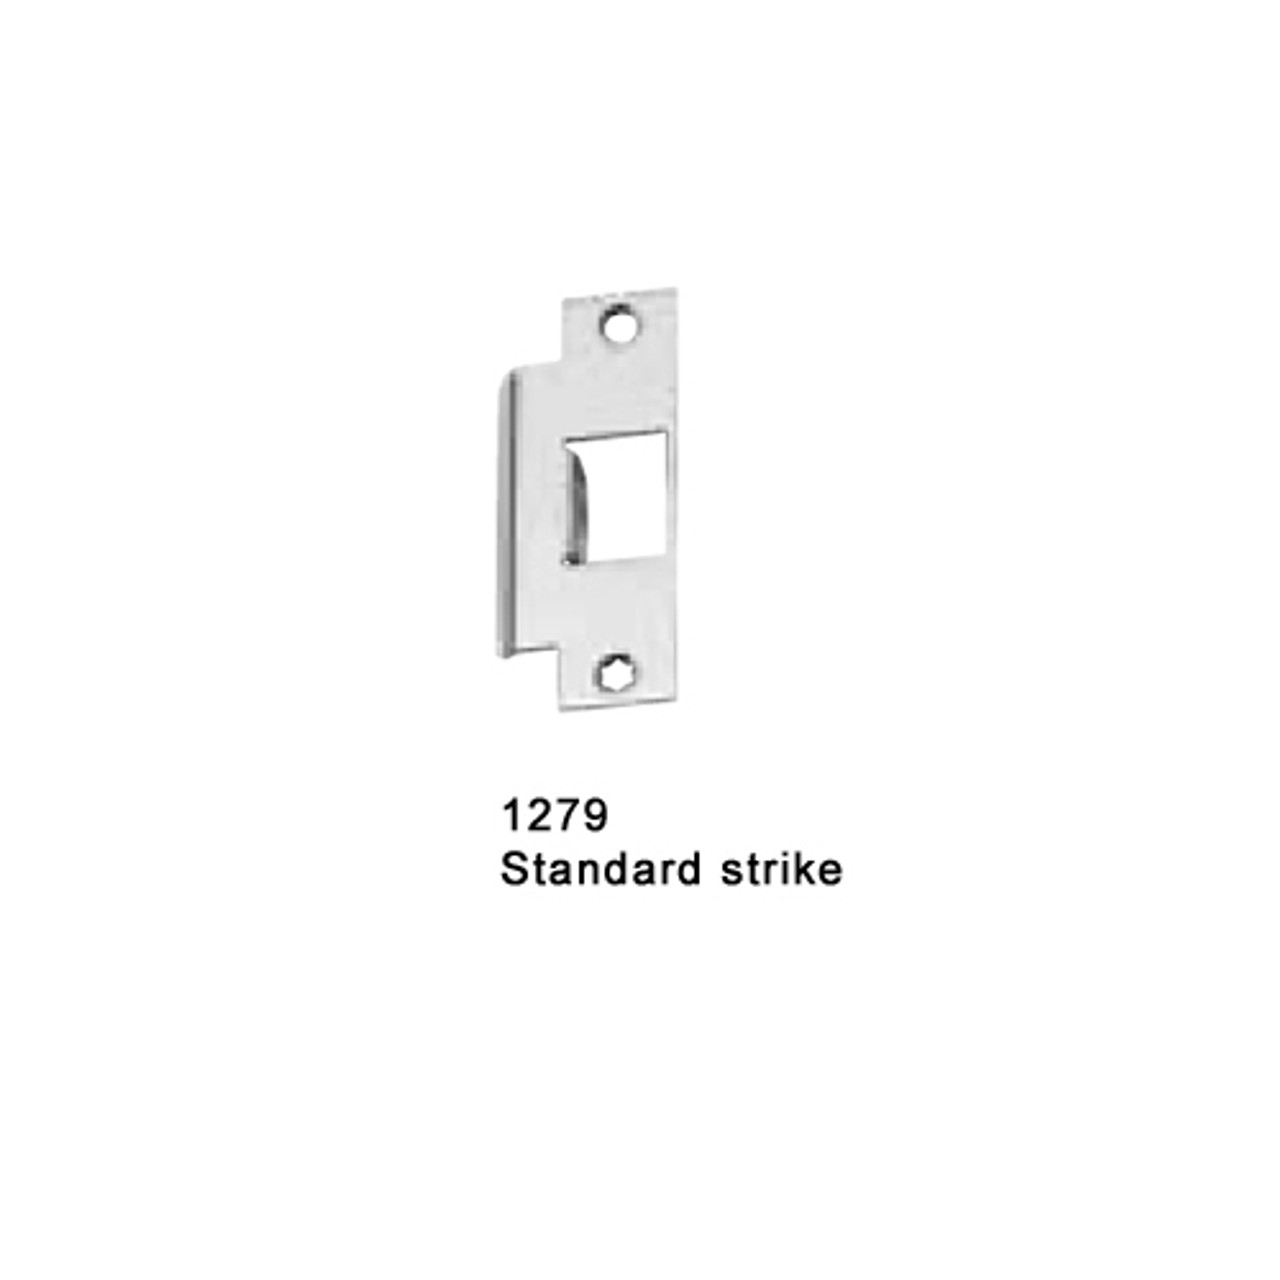 F-25-M-TP-US32D-4-RHR Falcon 25 Series Fire Rated Mortise Lock Devices with 512TP Thumbpiece Trim in Satin Stainless Steel